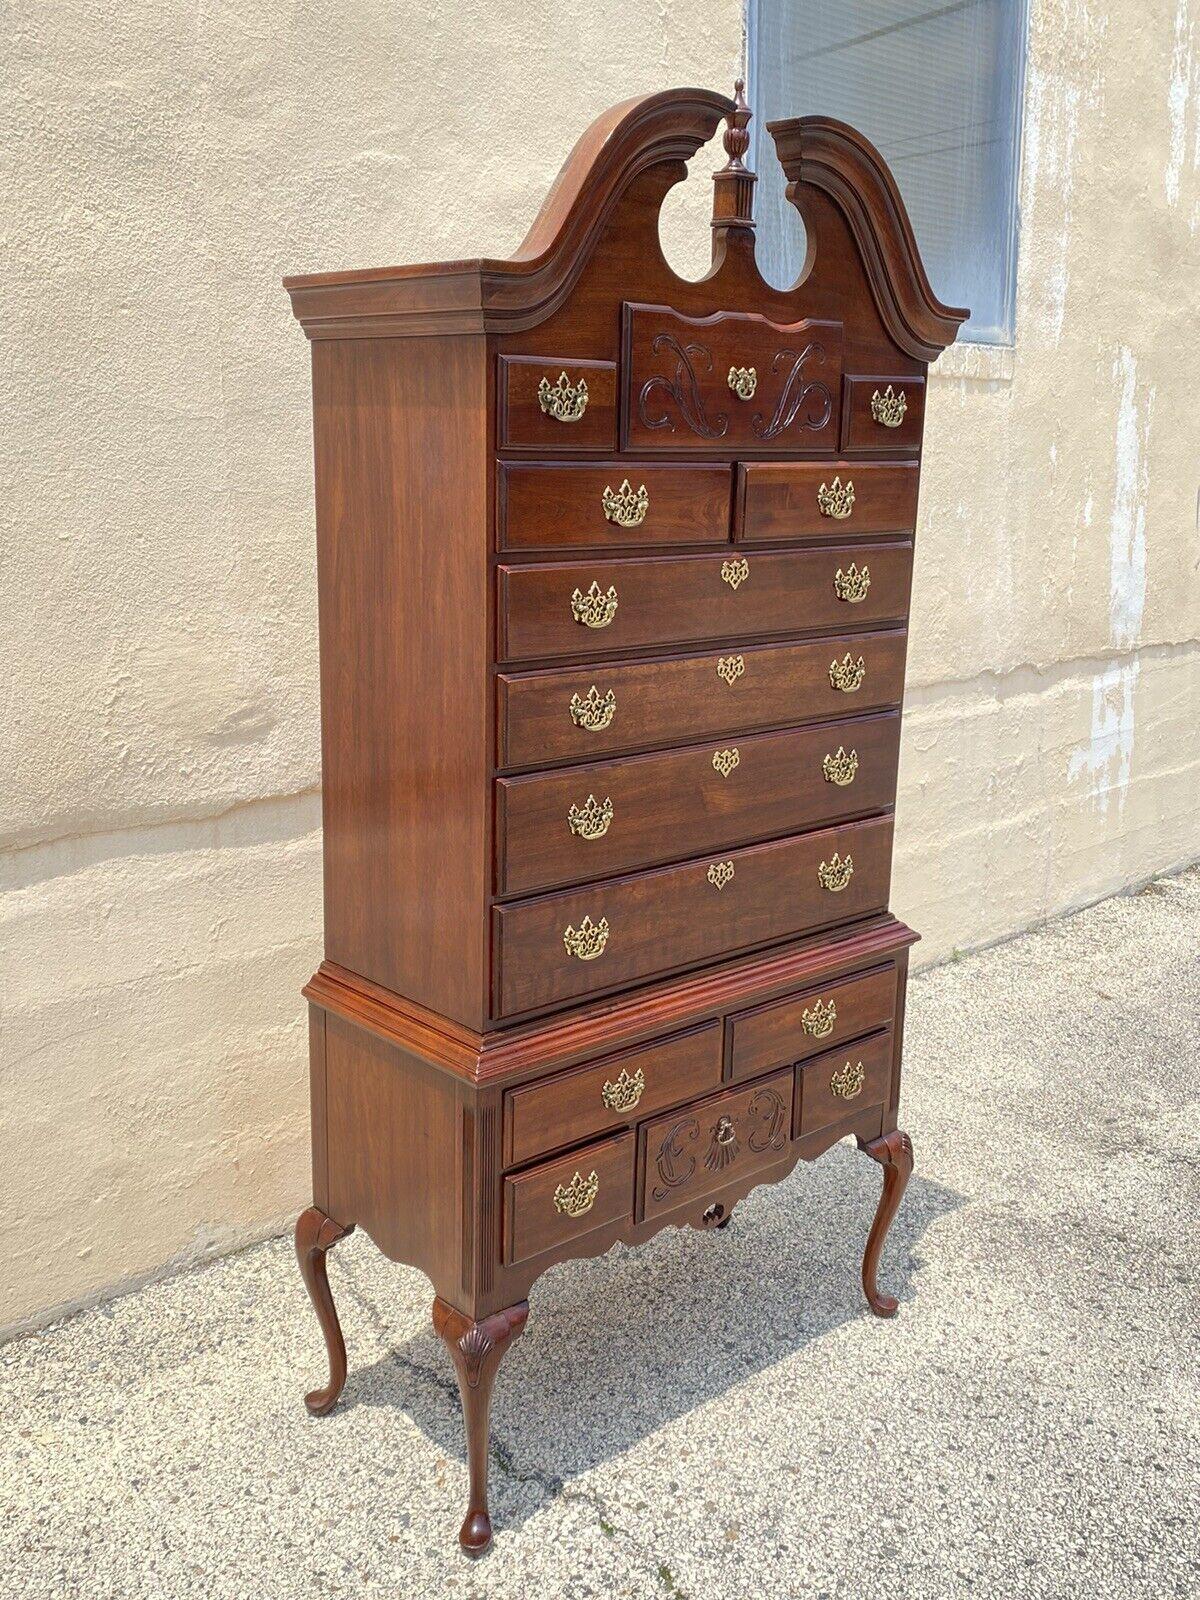 Thomasville Cherry Wood Queen Anne Style Highyboy Tall Chest Dresser. Item features a tall impressive form, Queen Anne style legs, nice carvings, 14 dovetailed drawers, original stamp, quality American craftsmanship. Circa Late 20th Century.